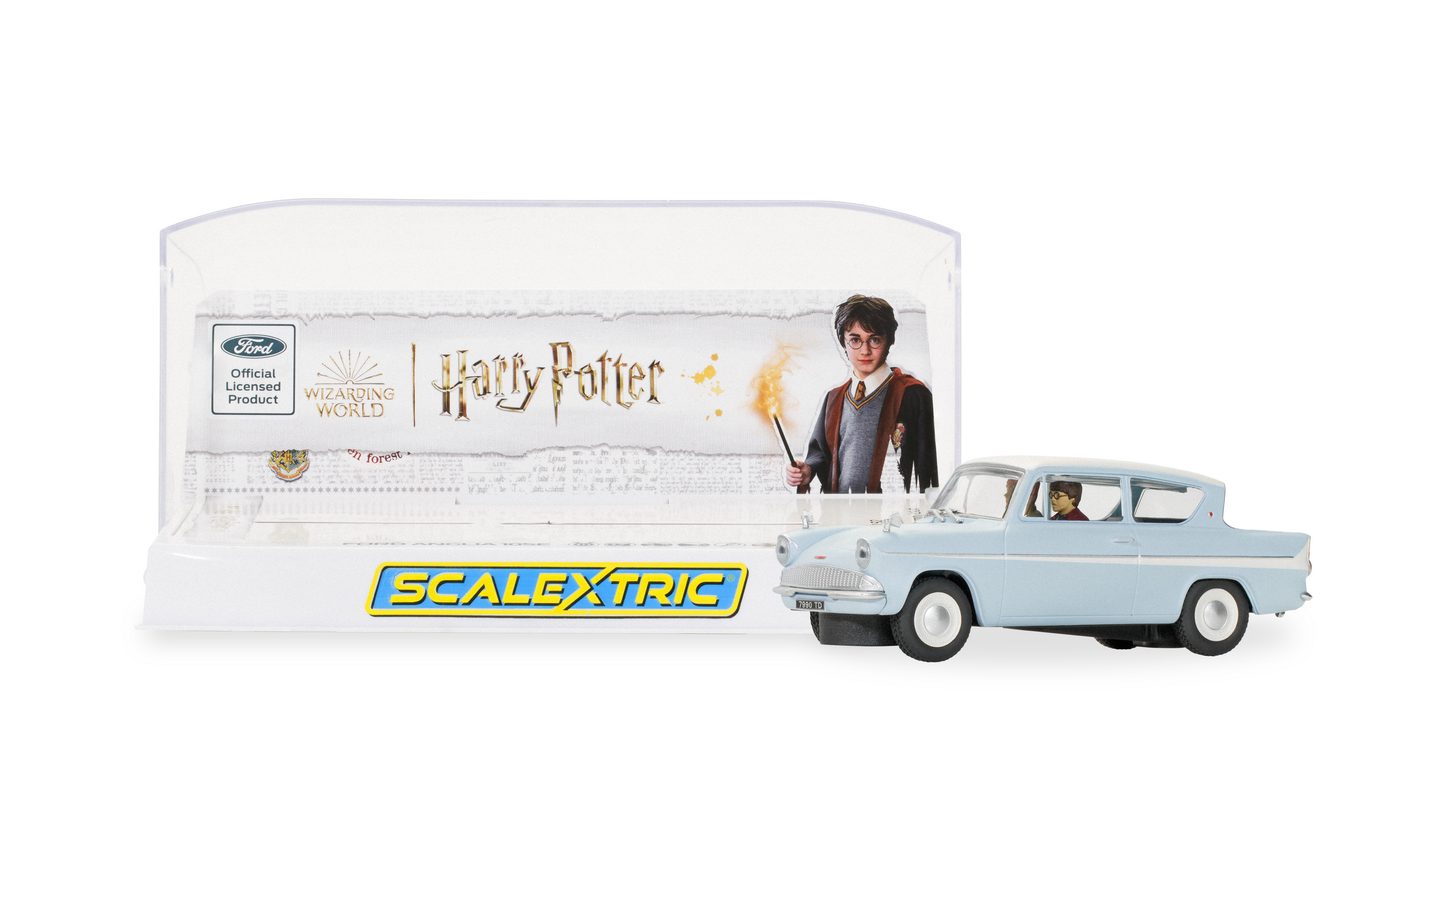 Scalextric launches Harry Potter Ford Anglia